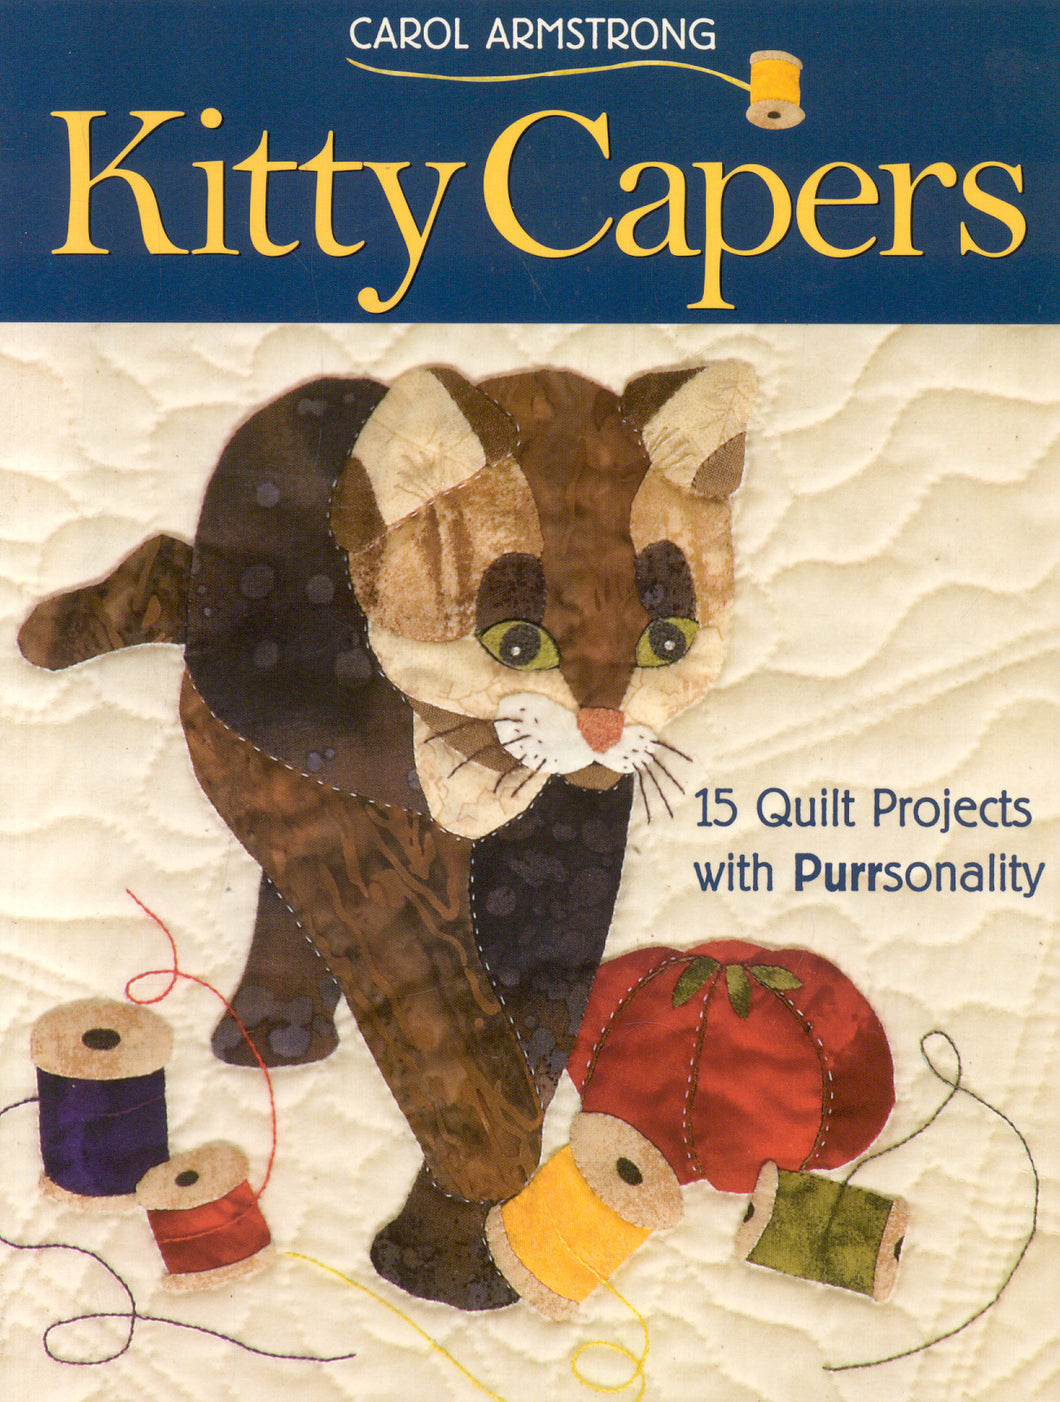 Kitty Capers